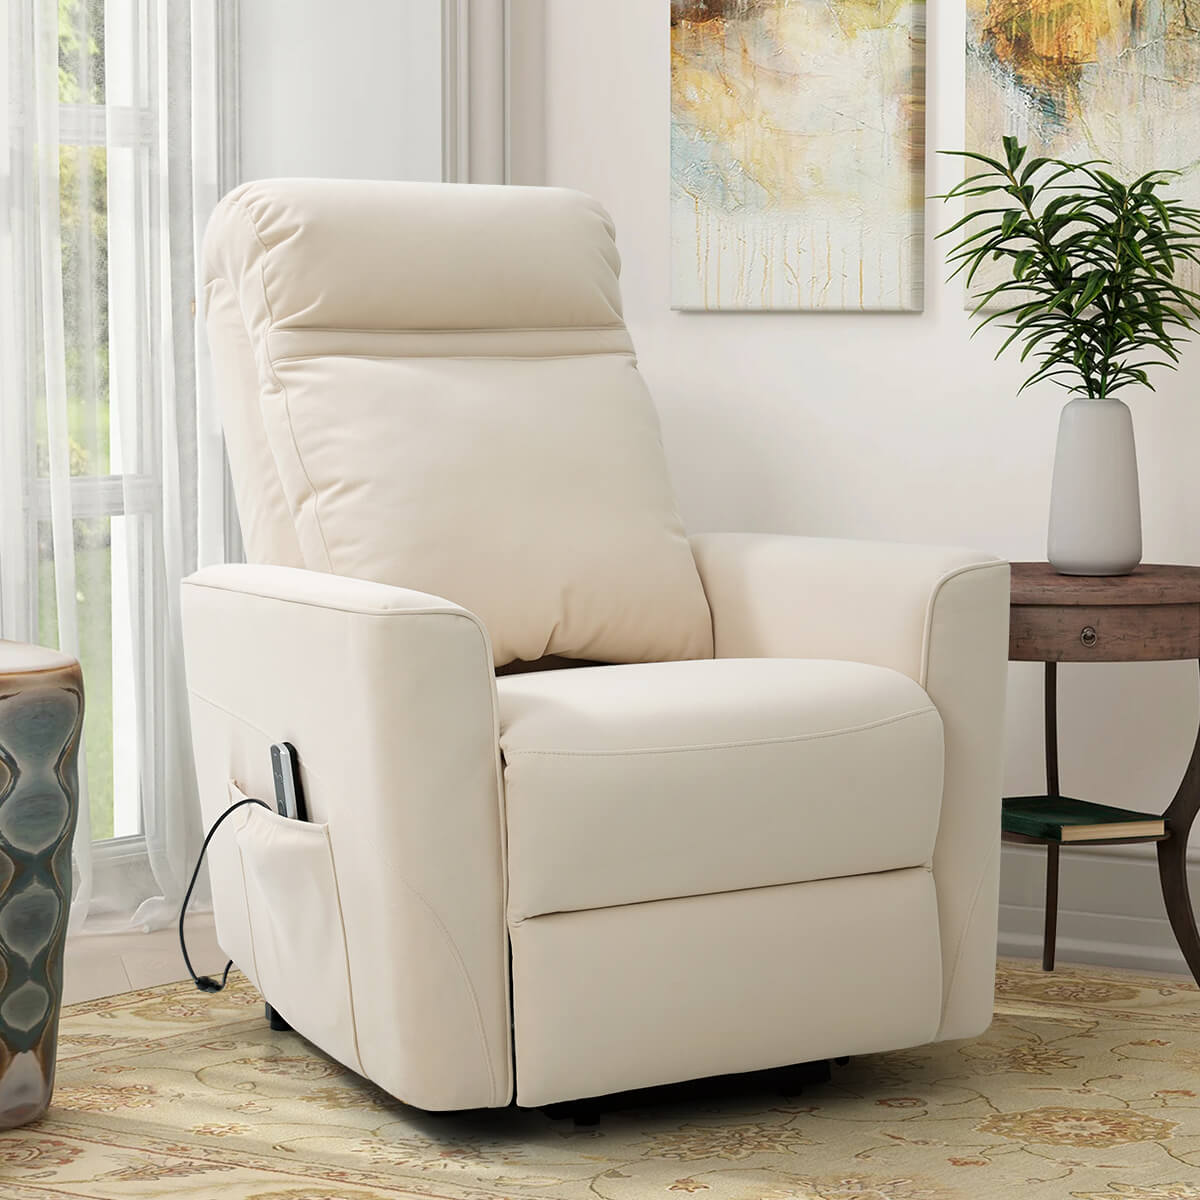 Soulout 8022 Power Lift Chair with Kneading Massage beige